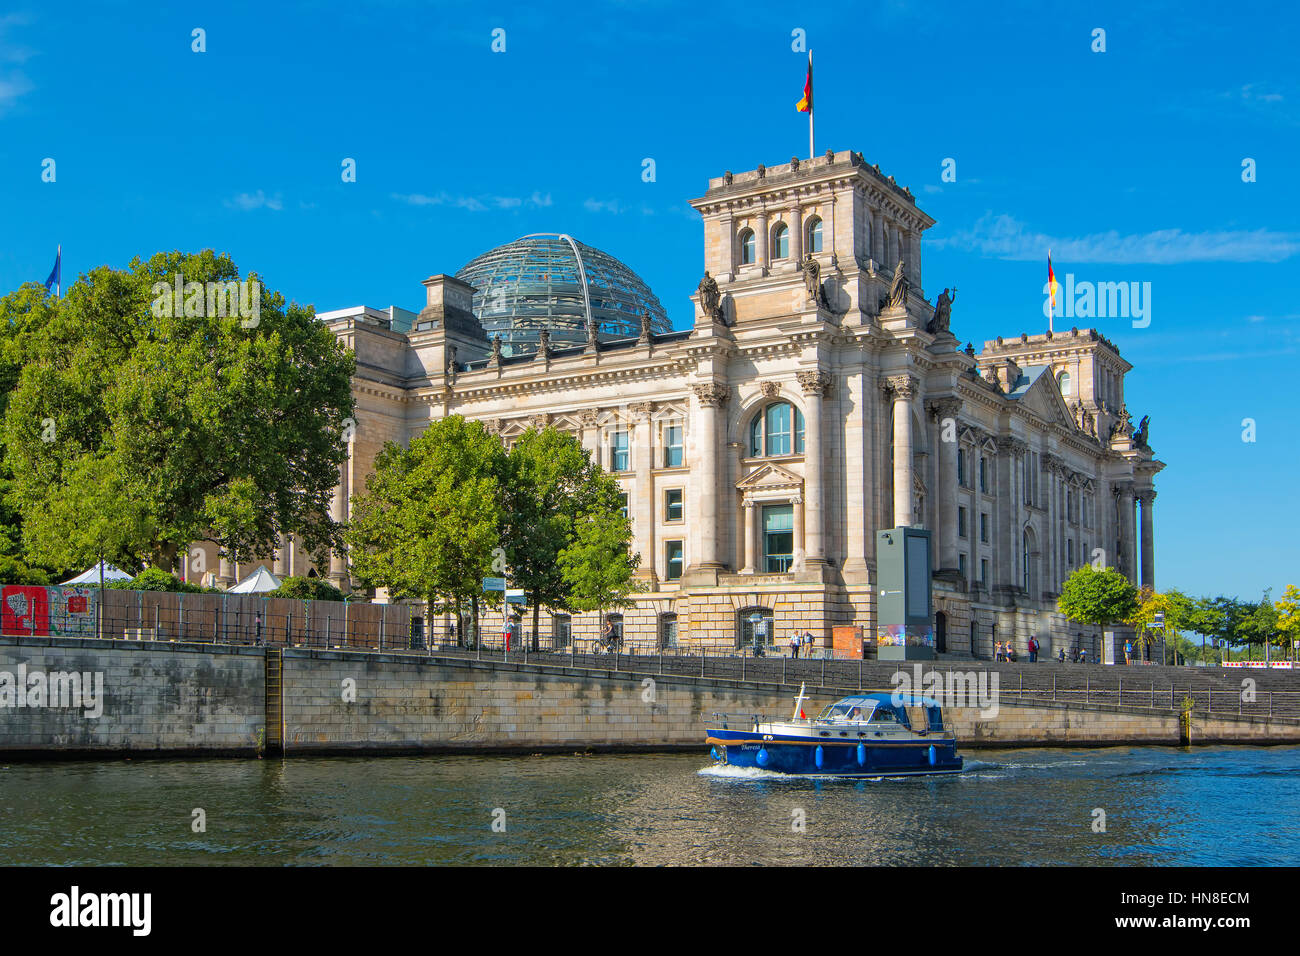 The Reichstag building and Spree river in Berlin Stock Photo